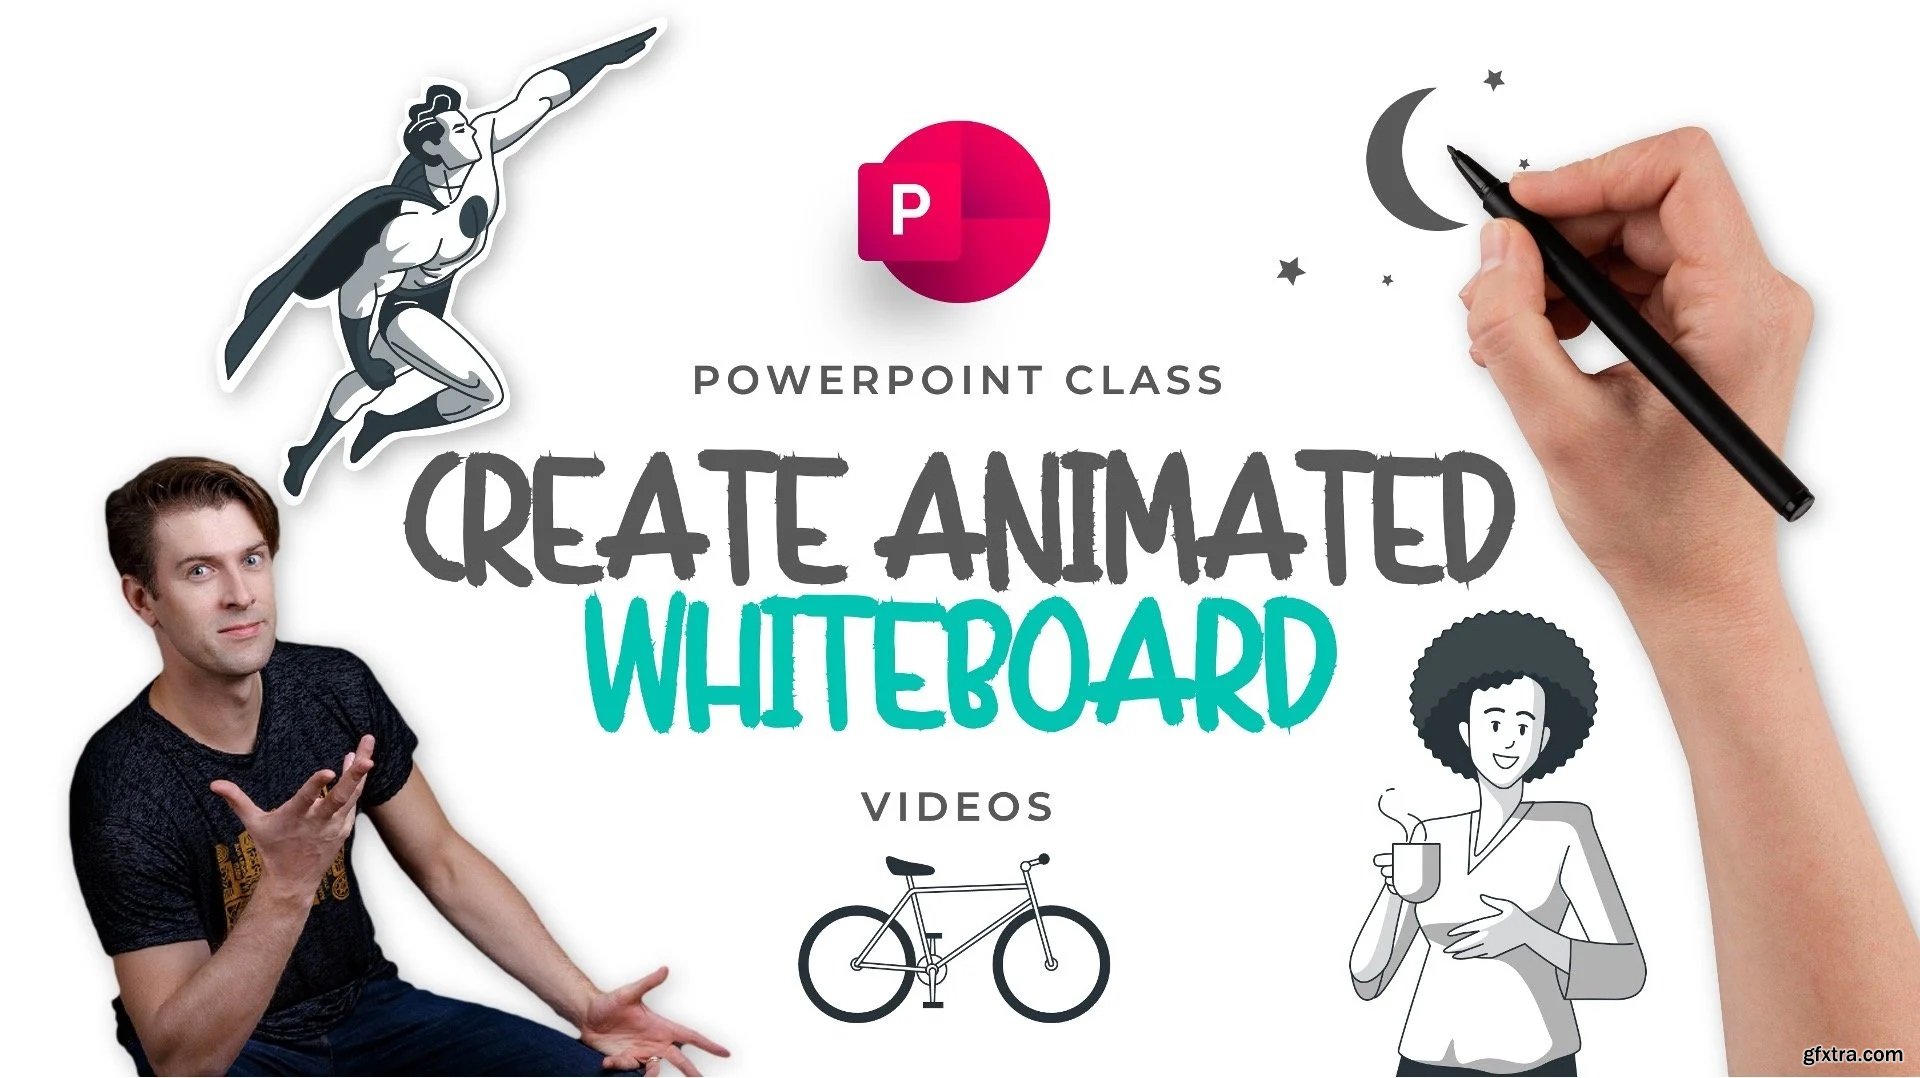 Create Animated Whiteboard Videos in PowerPoint » GFxtra